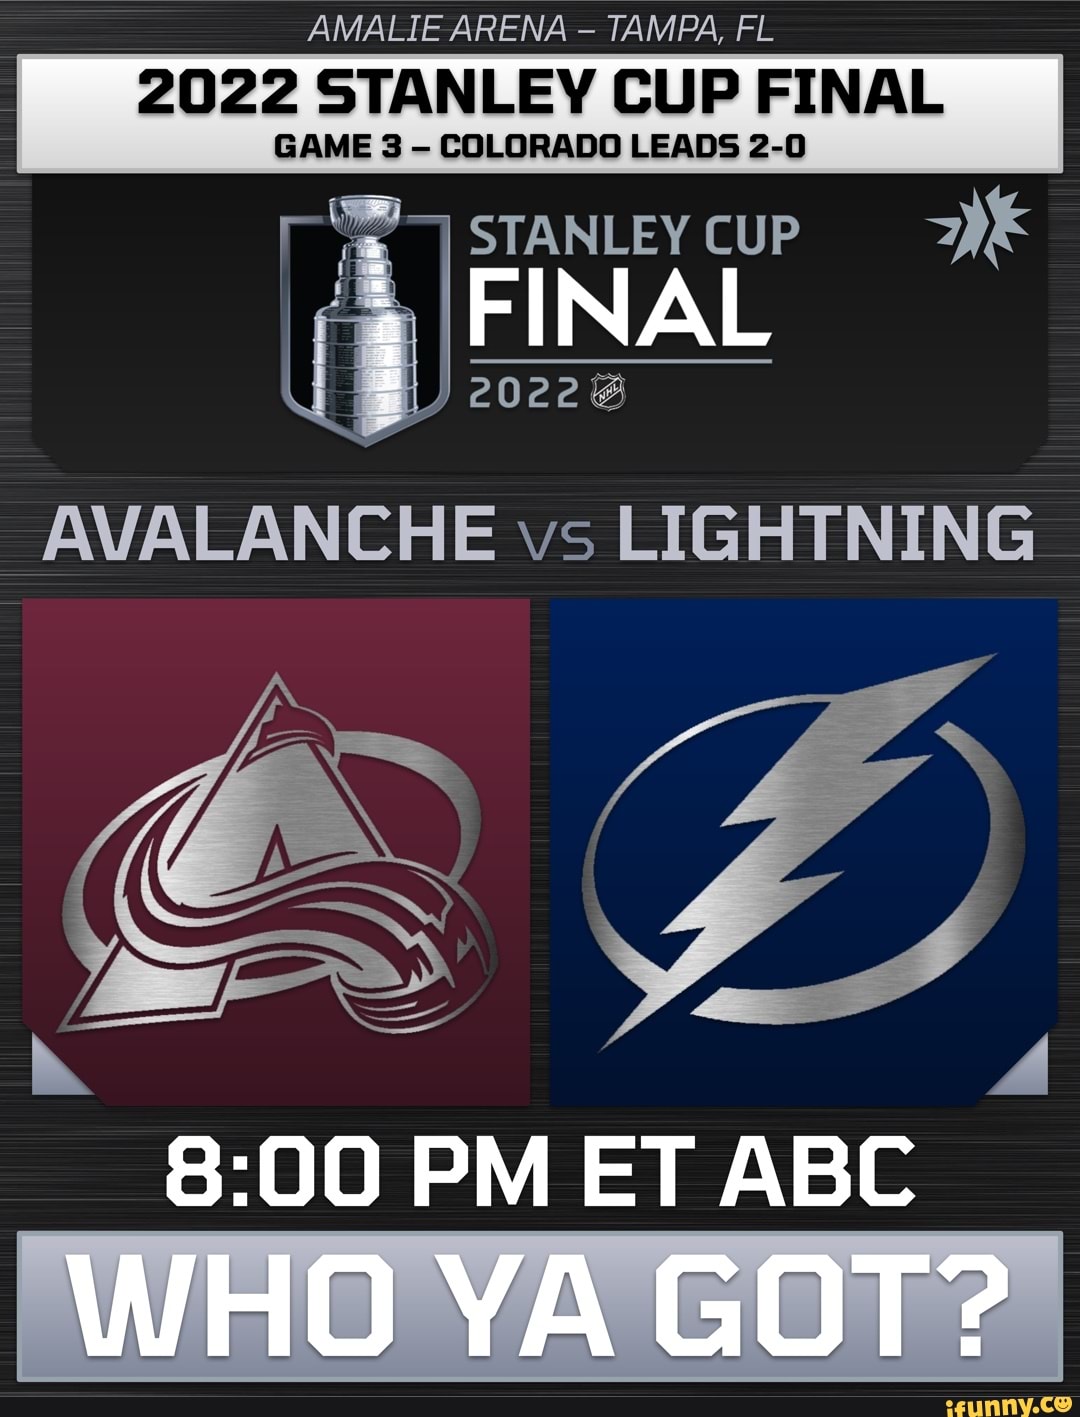 Amalie Arena Tampa Fl 2022 Stanley Cup Final Game 3 Colorado Leads 2 0 Final Avalanche Vs 